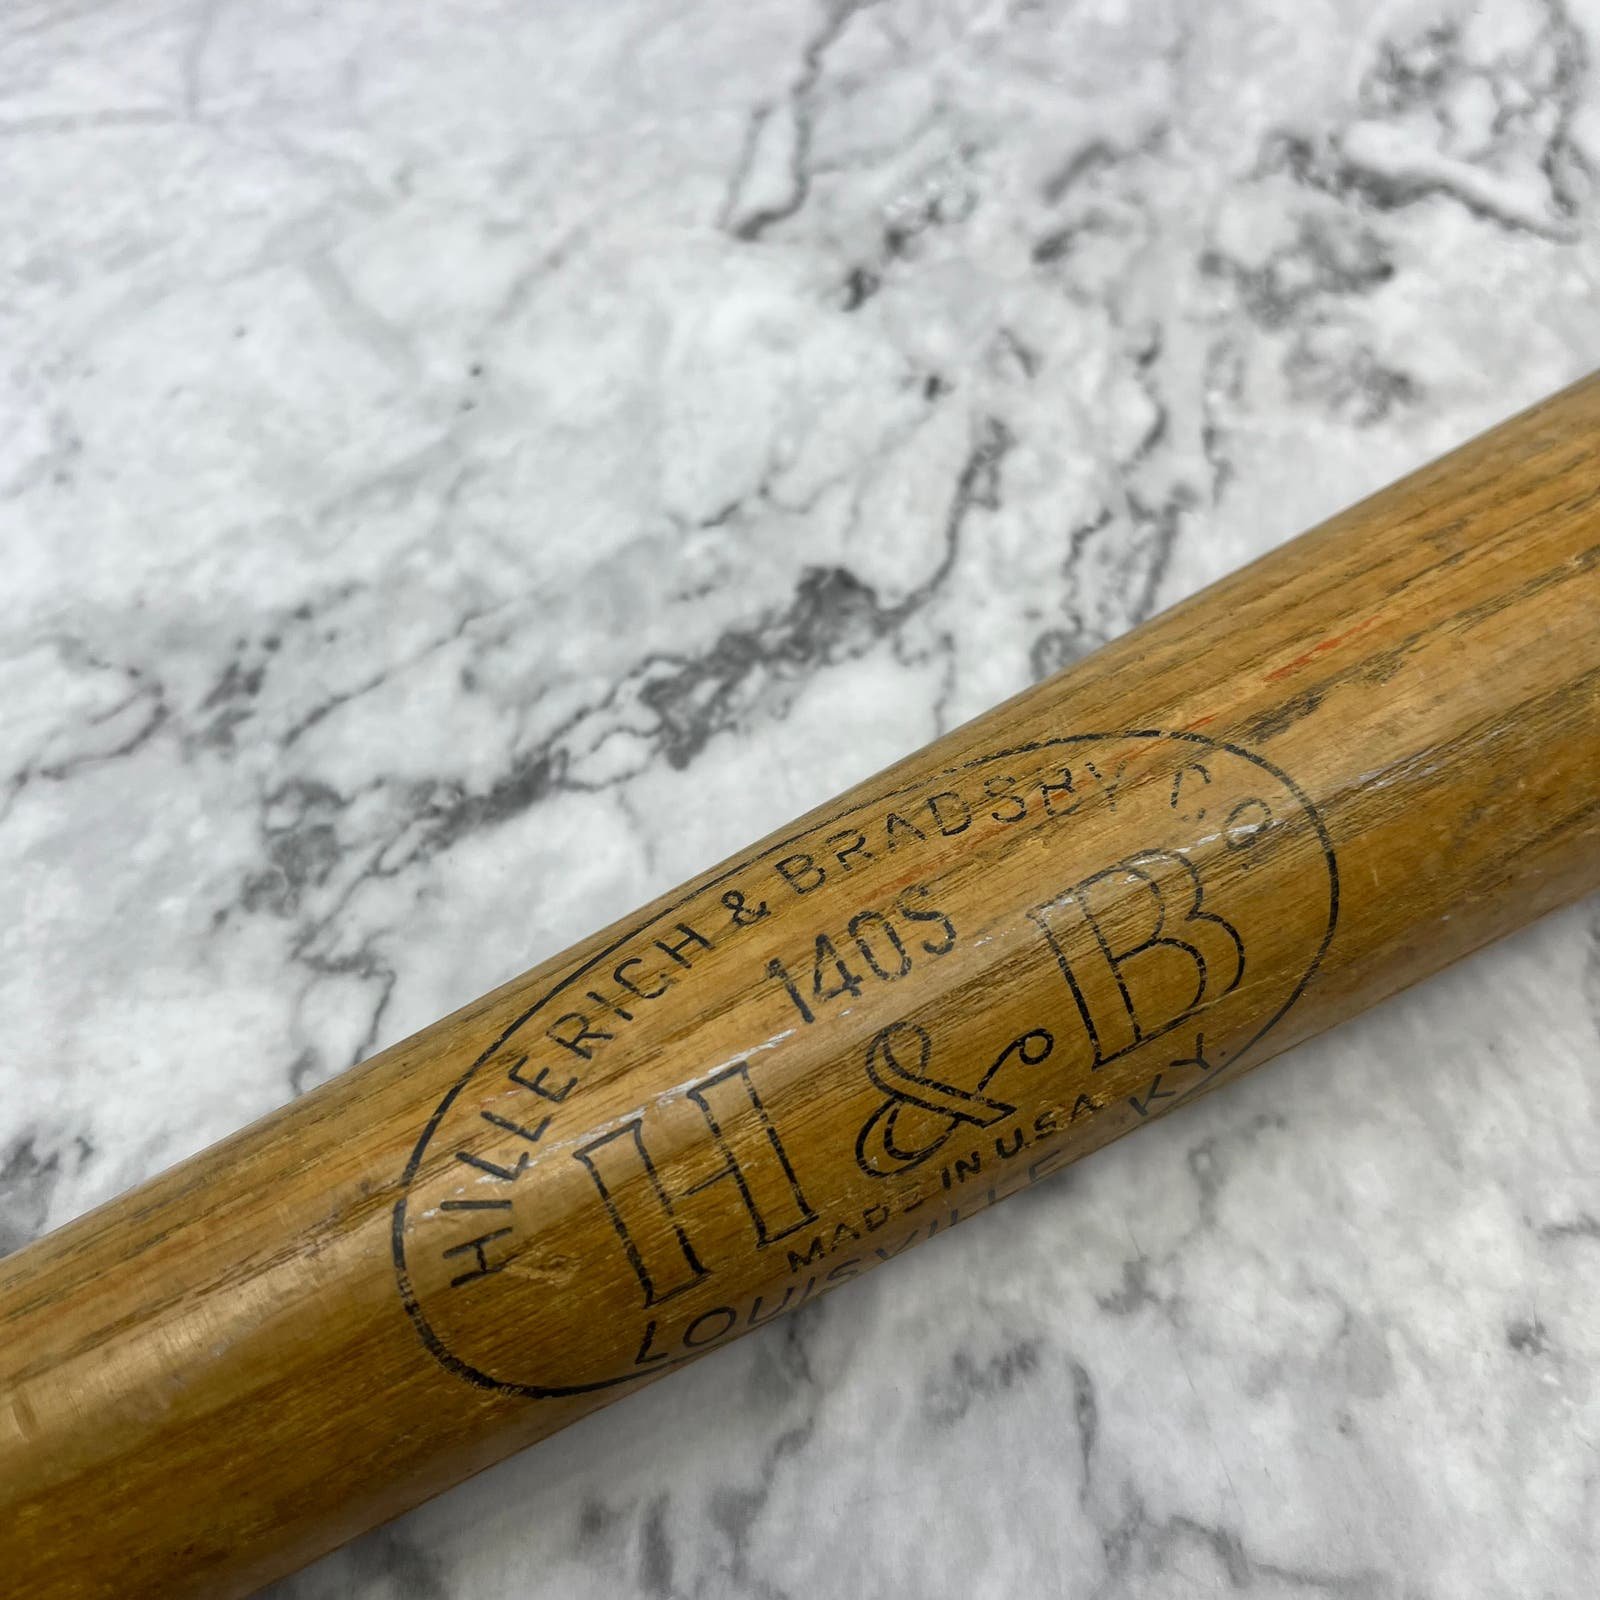 Vintage 140S H&B Special Power Drive Mickey Mantle Model Wood Bat 33 Louisville gzfFt02s9